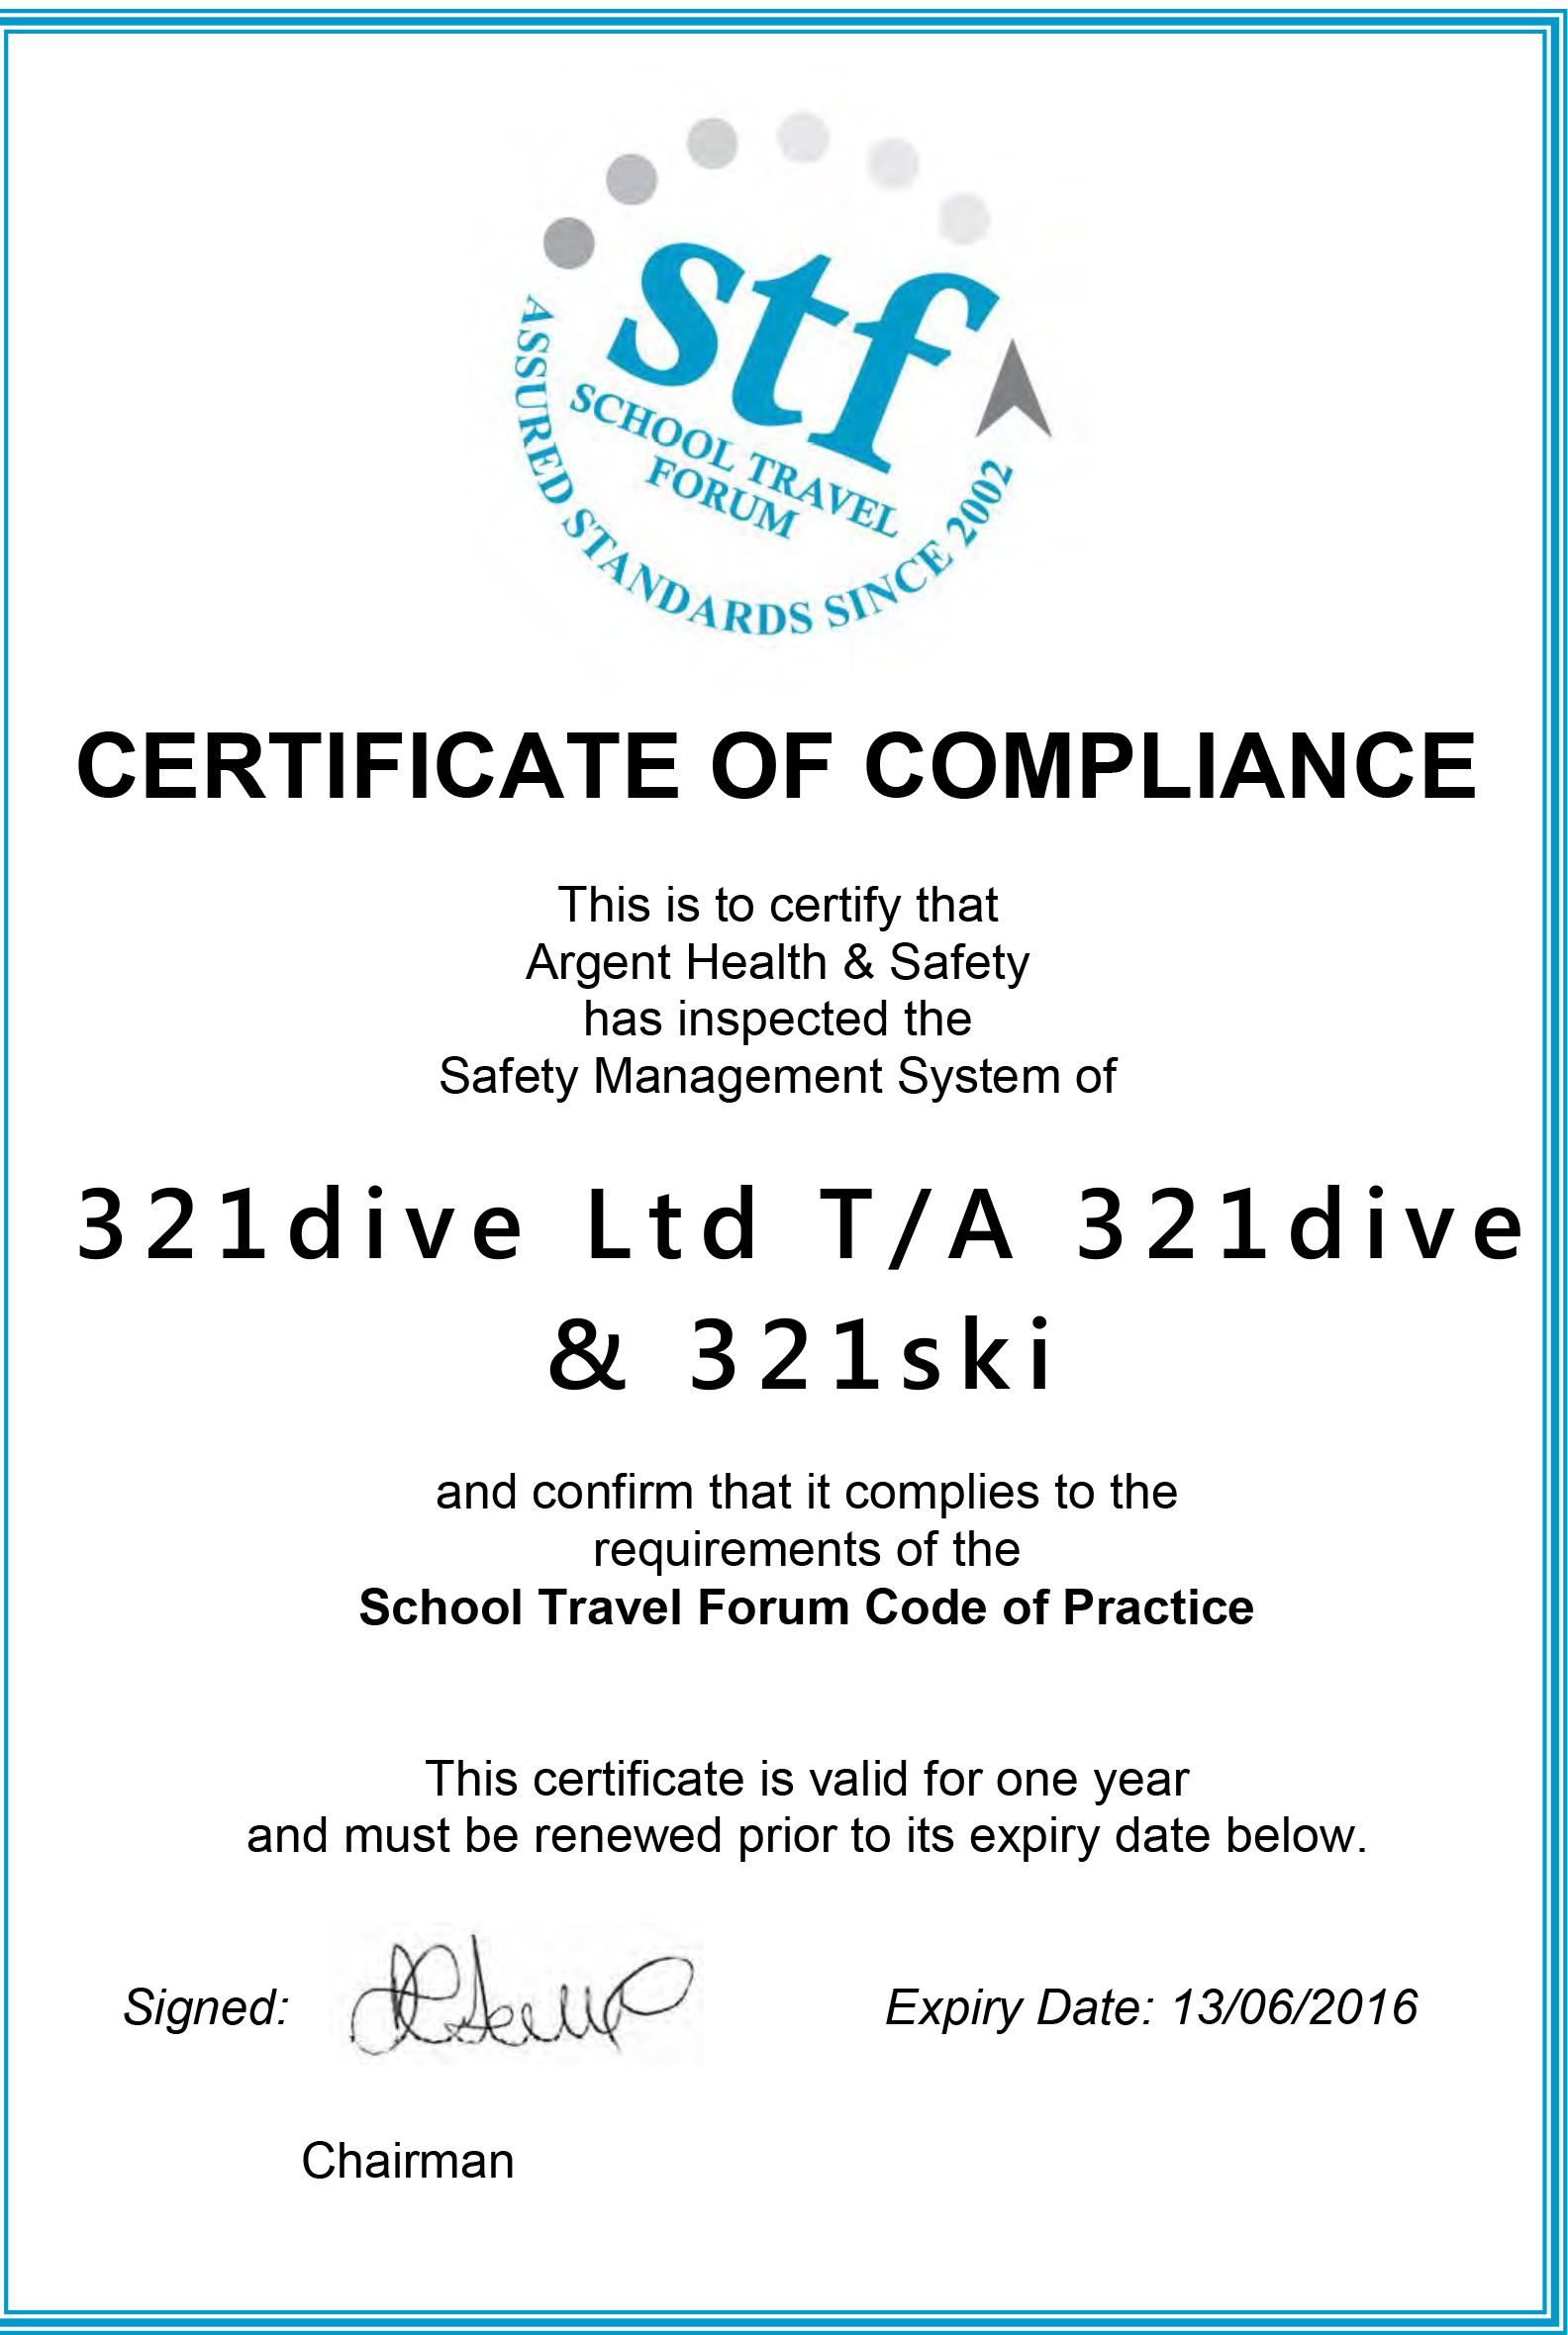 STF Cert of compliance 2015